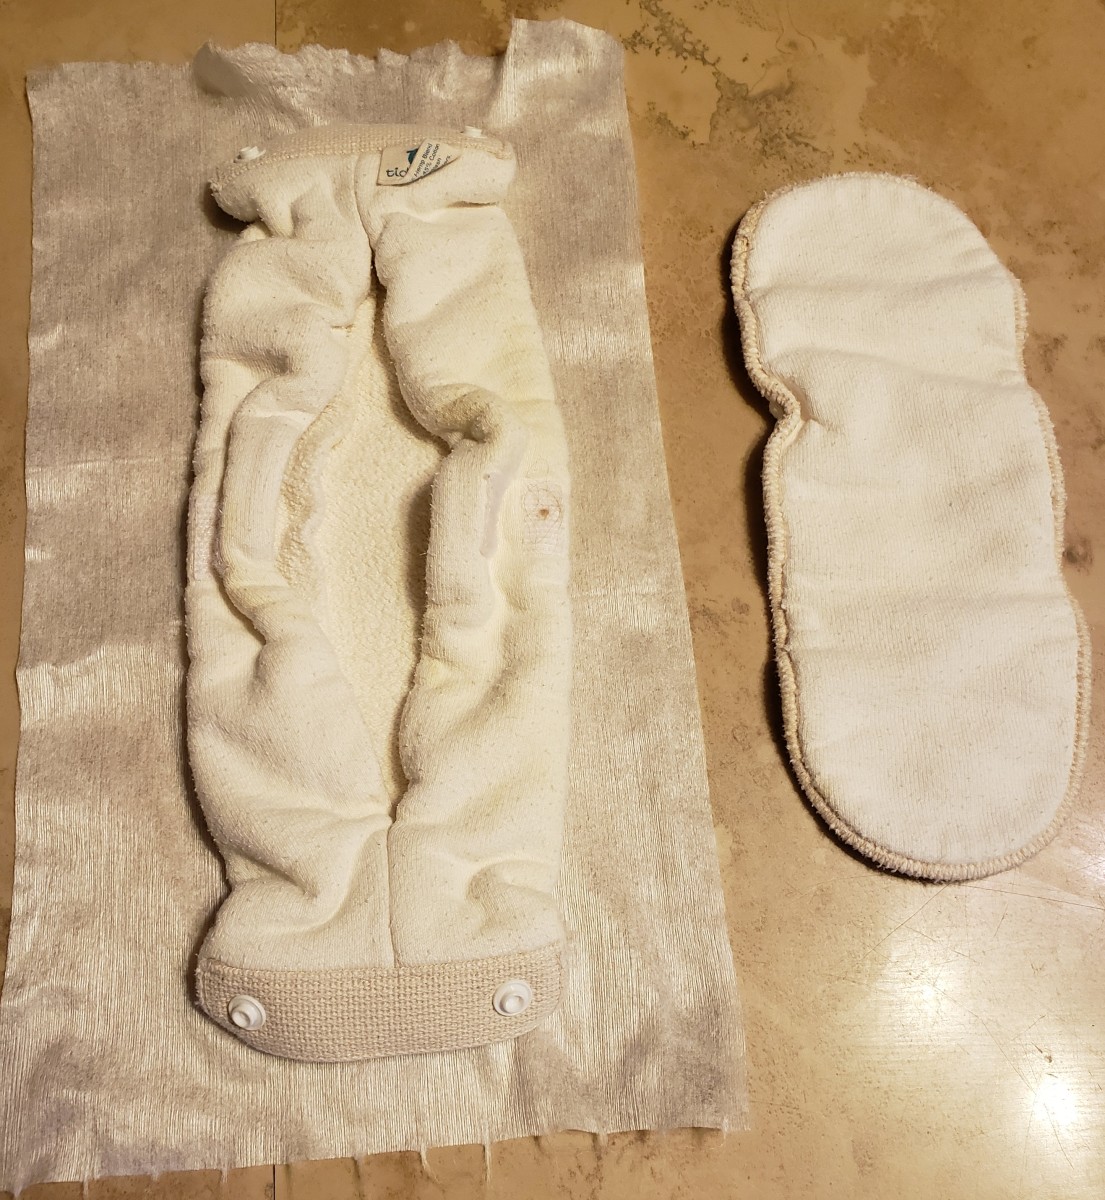 Diaper, Liner and Booster: the booster on the right slips inside the diaper on the left. Then the liner wraps around the whole thing, folding over the sides. Velcro holds the liner in place.